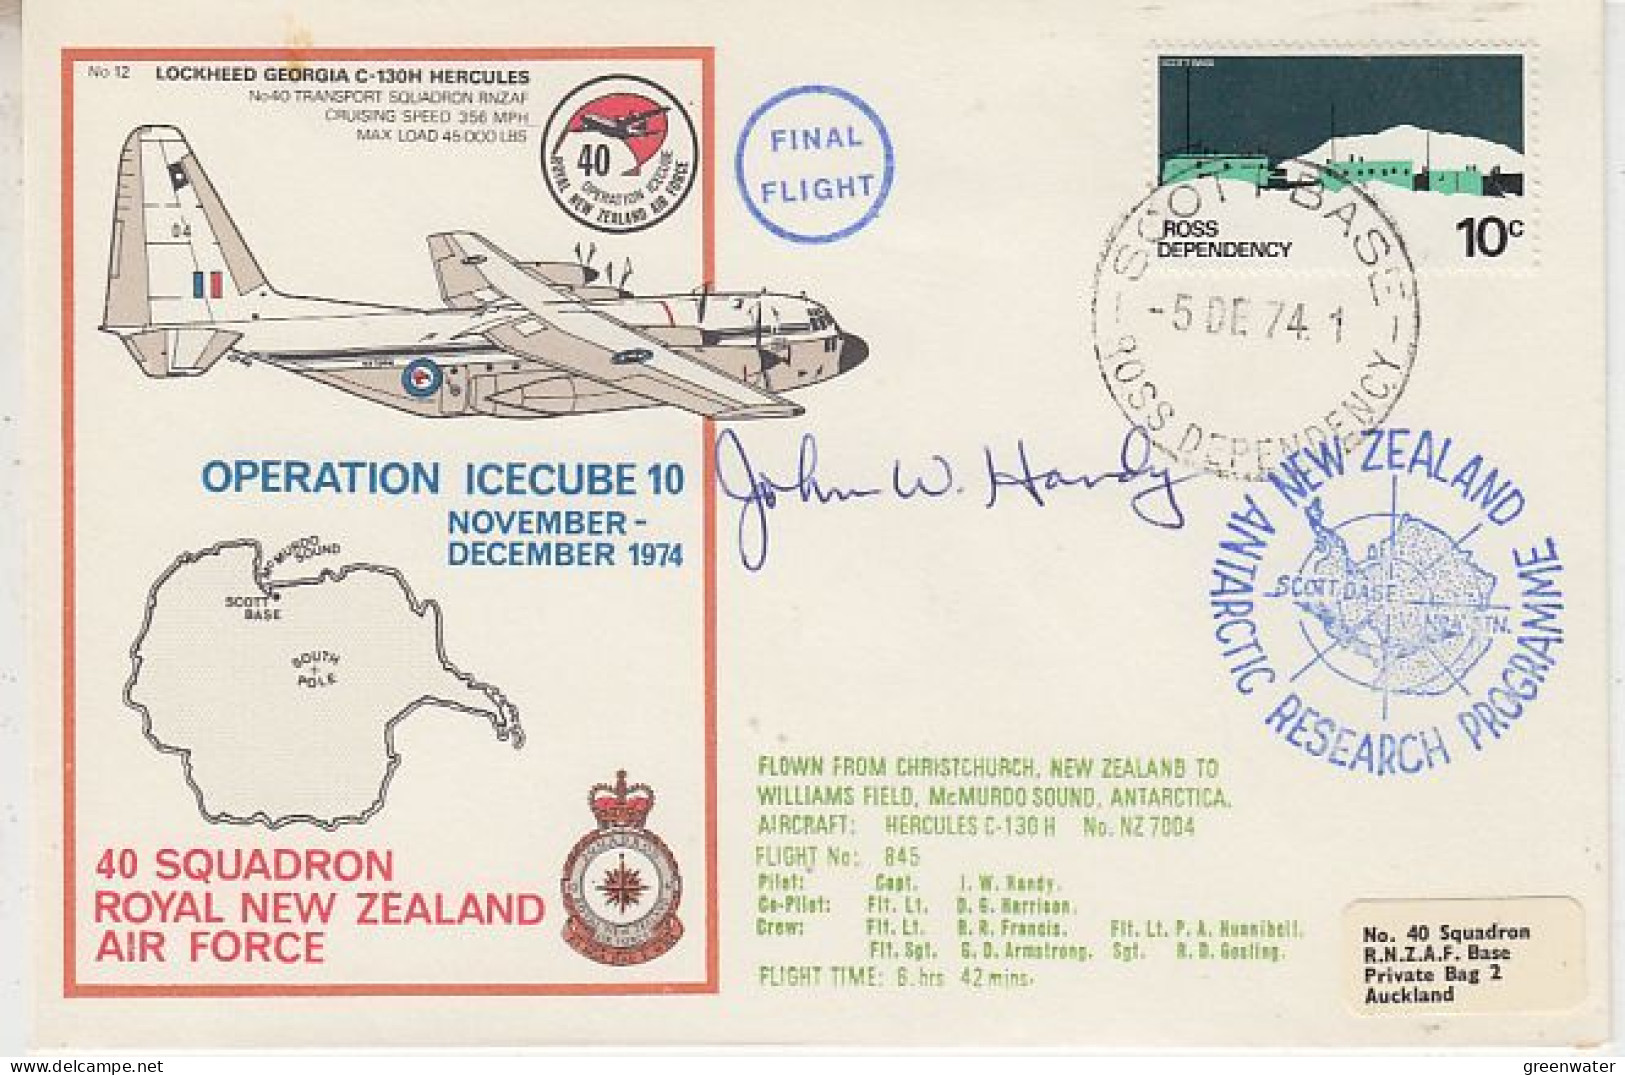 Ross Dependency 1974 Operation Icecube 10 Signature  Ca Scott Base 5 DEC 1974 (RT188) - Covers & Documents